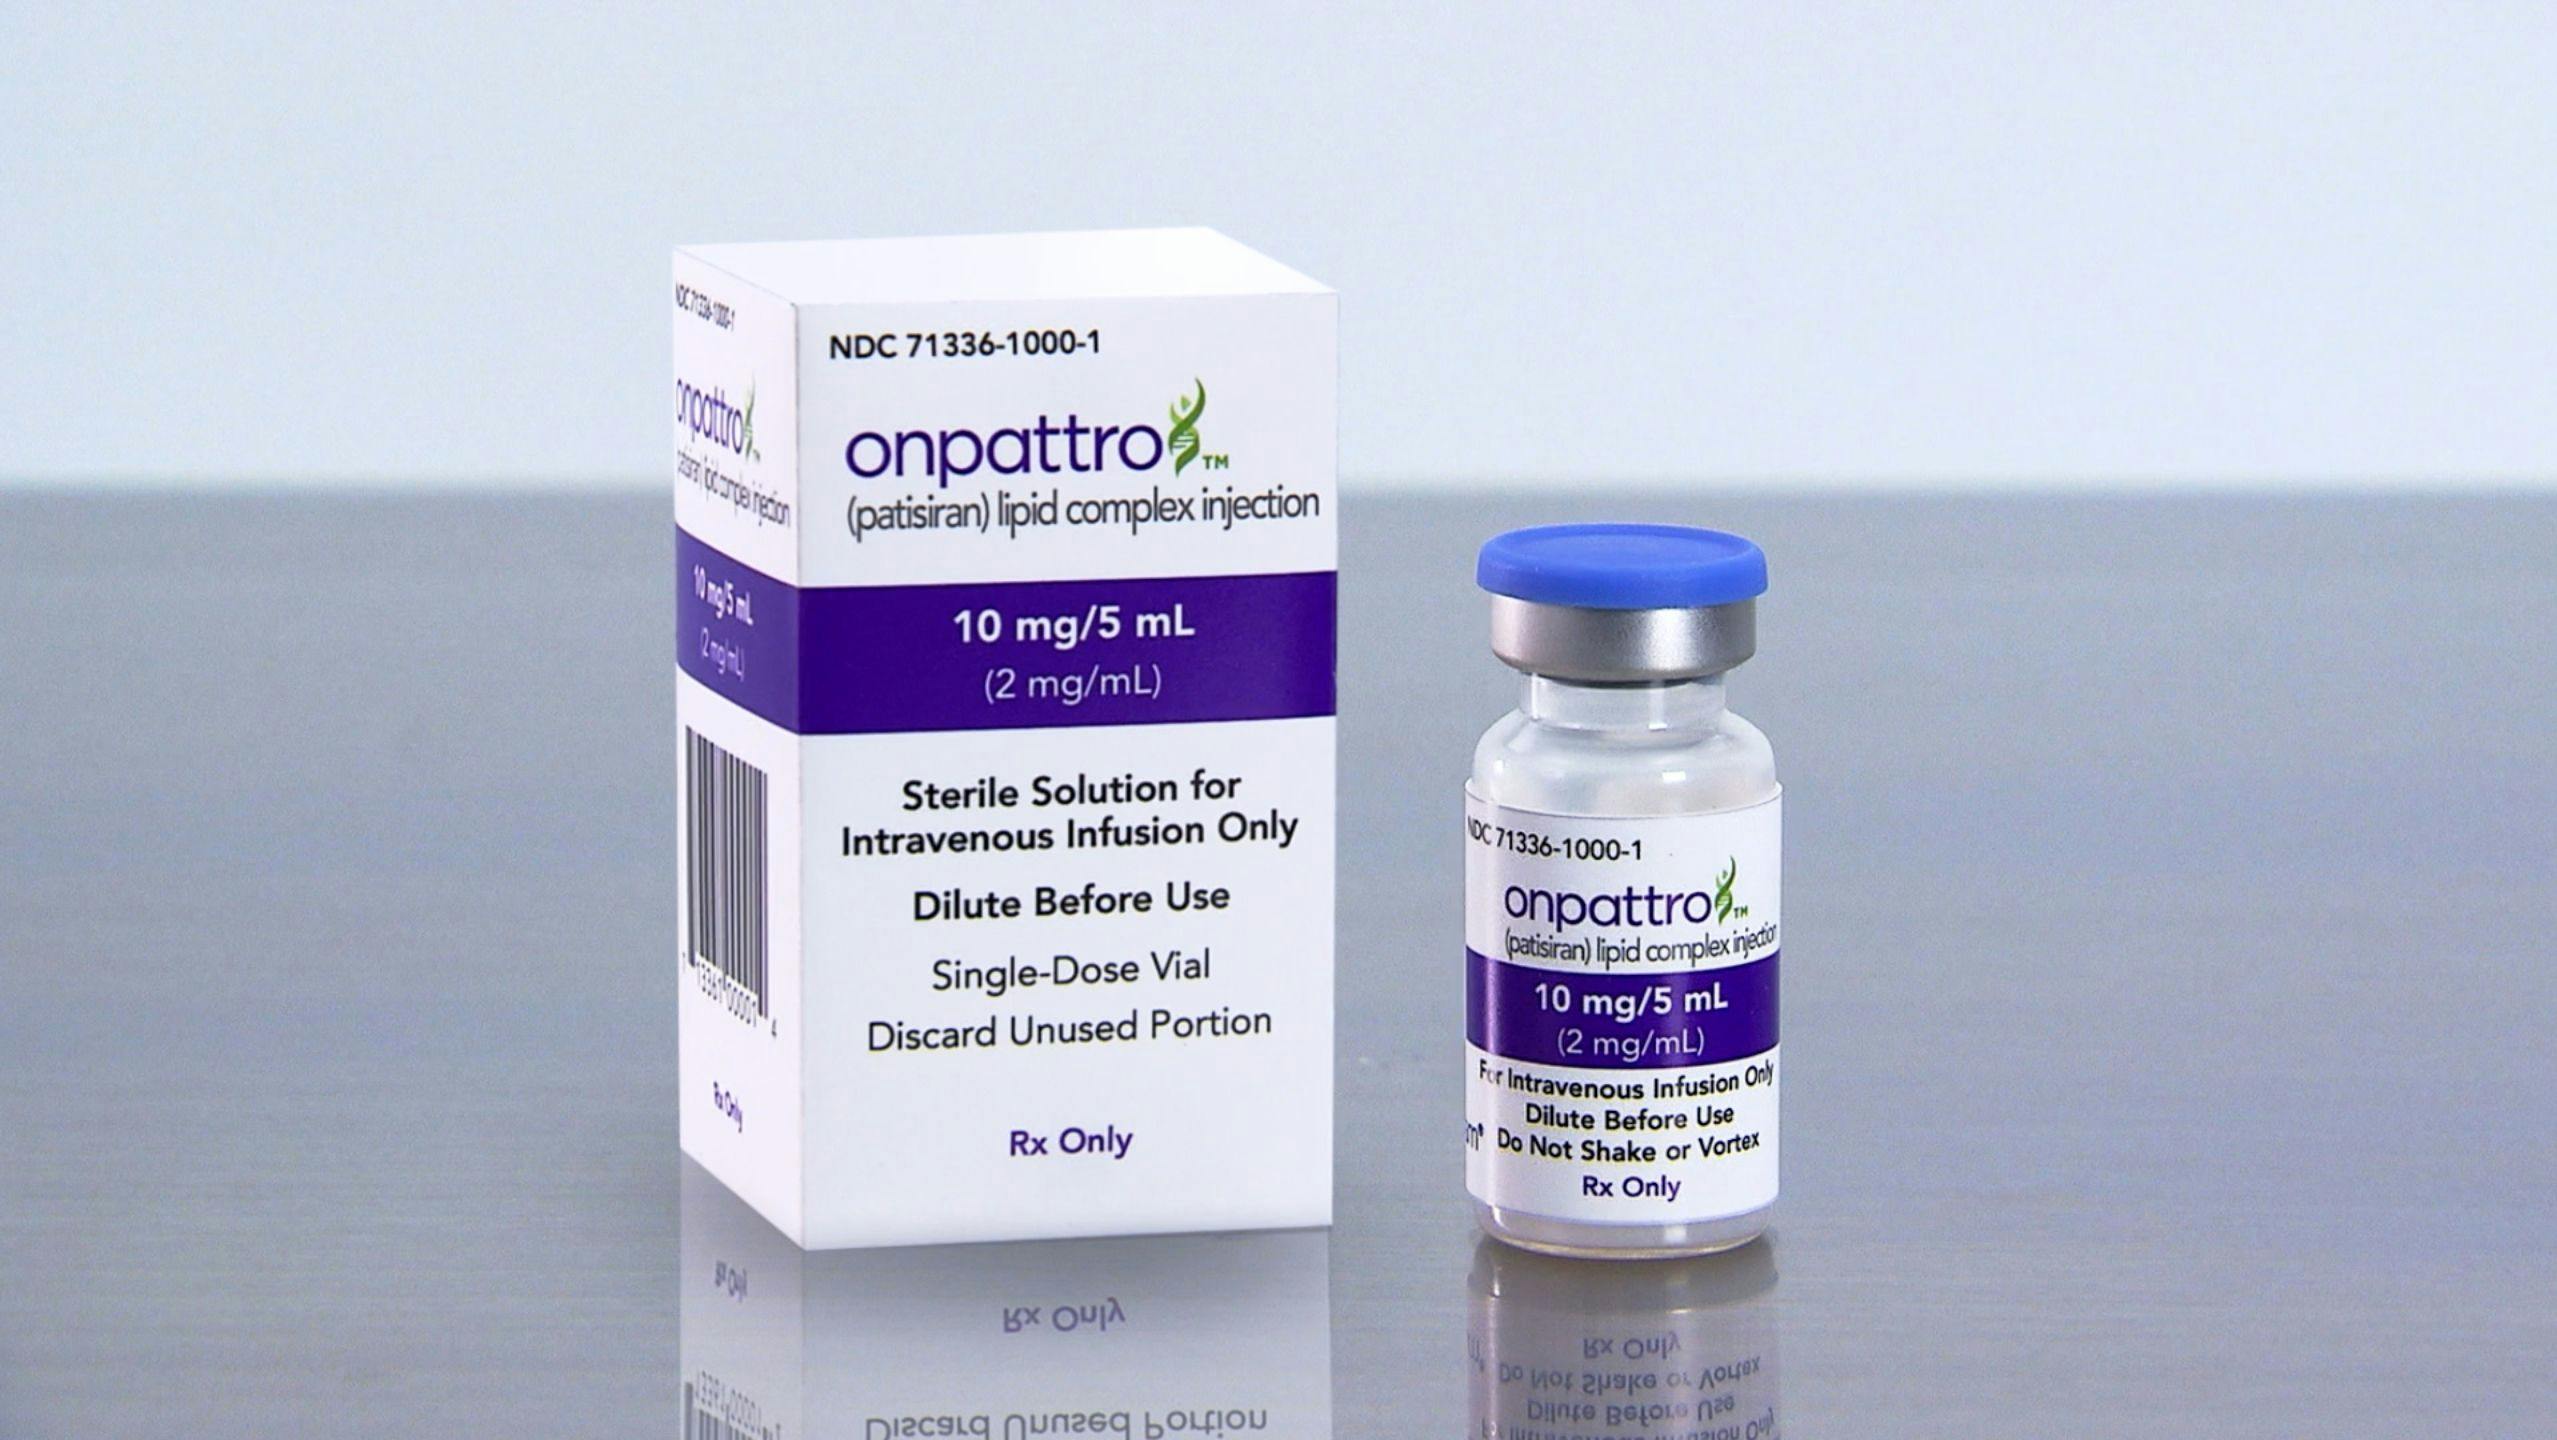 FDA to Hold Advisory Committee Meeting on Onpattro for Heart Failure Indication 